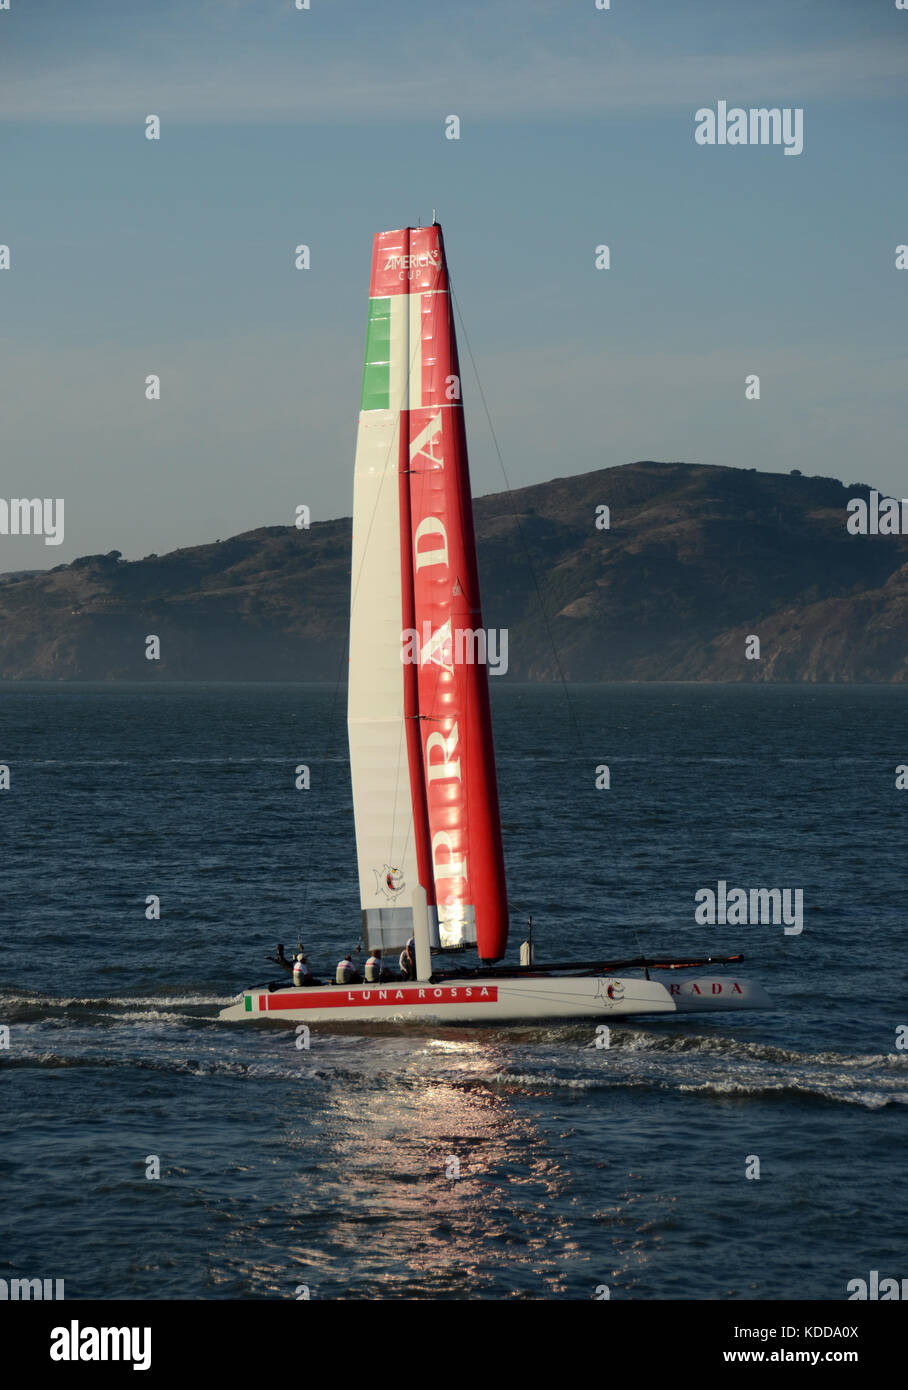 San Francisco, USA - October 2, 2012: America's Cup Luna Rossa catamaran sails in the San Francisco Bay prior to racing day. Luna Rossa is sponsored b Stock Photo